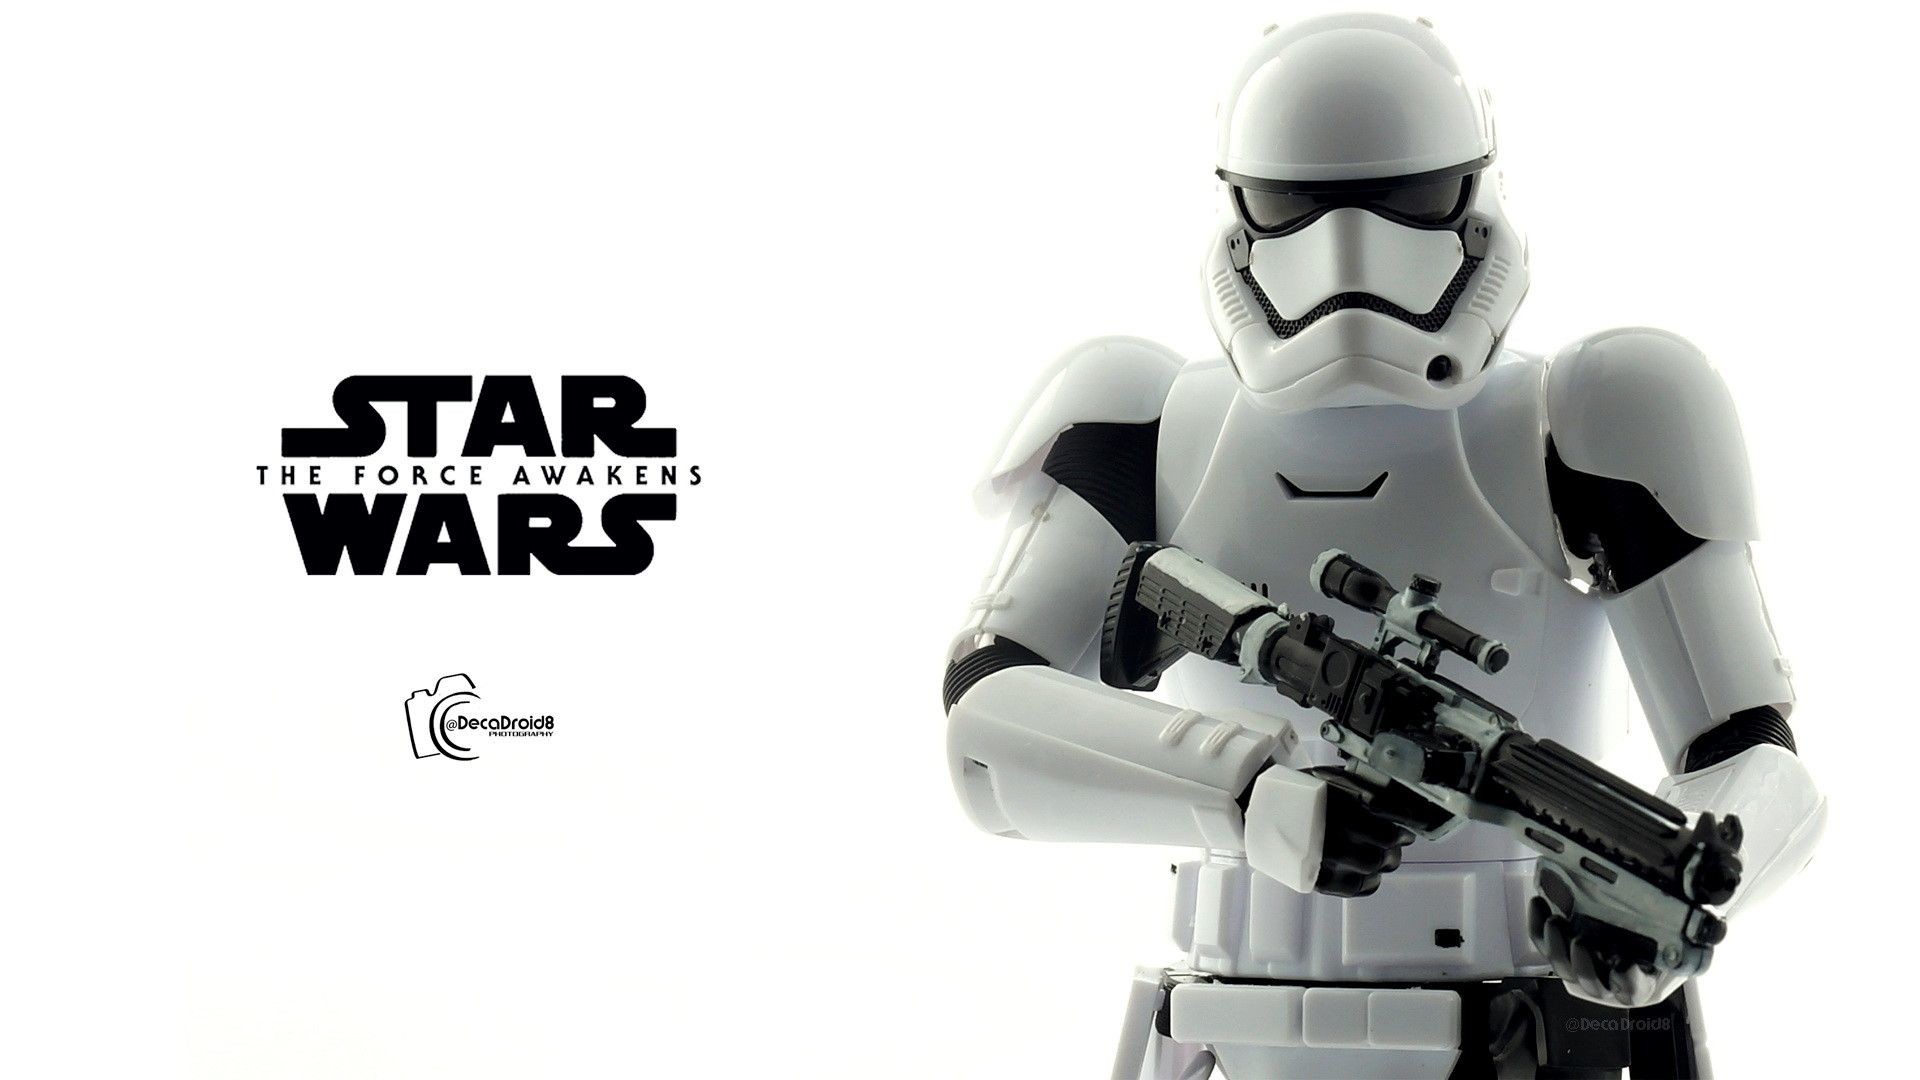 1920x1080  Star Wars Stormtrooper White Soldiers Models Hd Wallpapers ...">